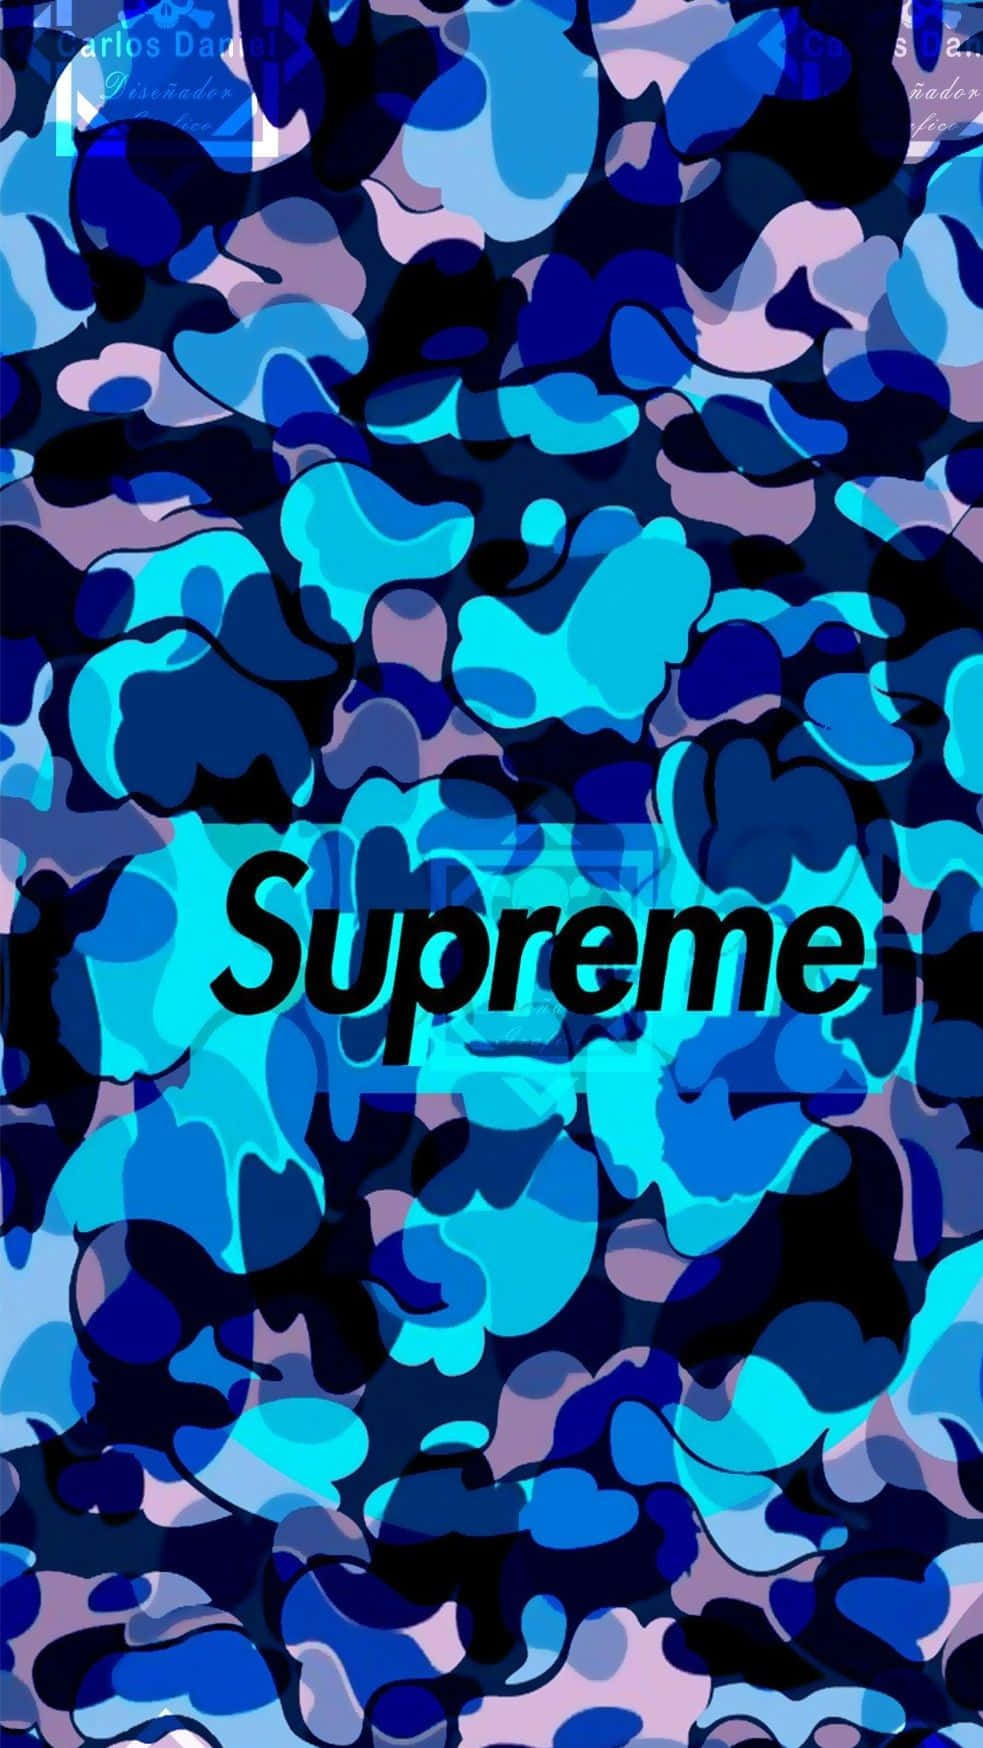 Look stylish and stand out from the crowd with the Blue Hypebeast streetwear look. Wallpaper